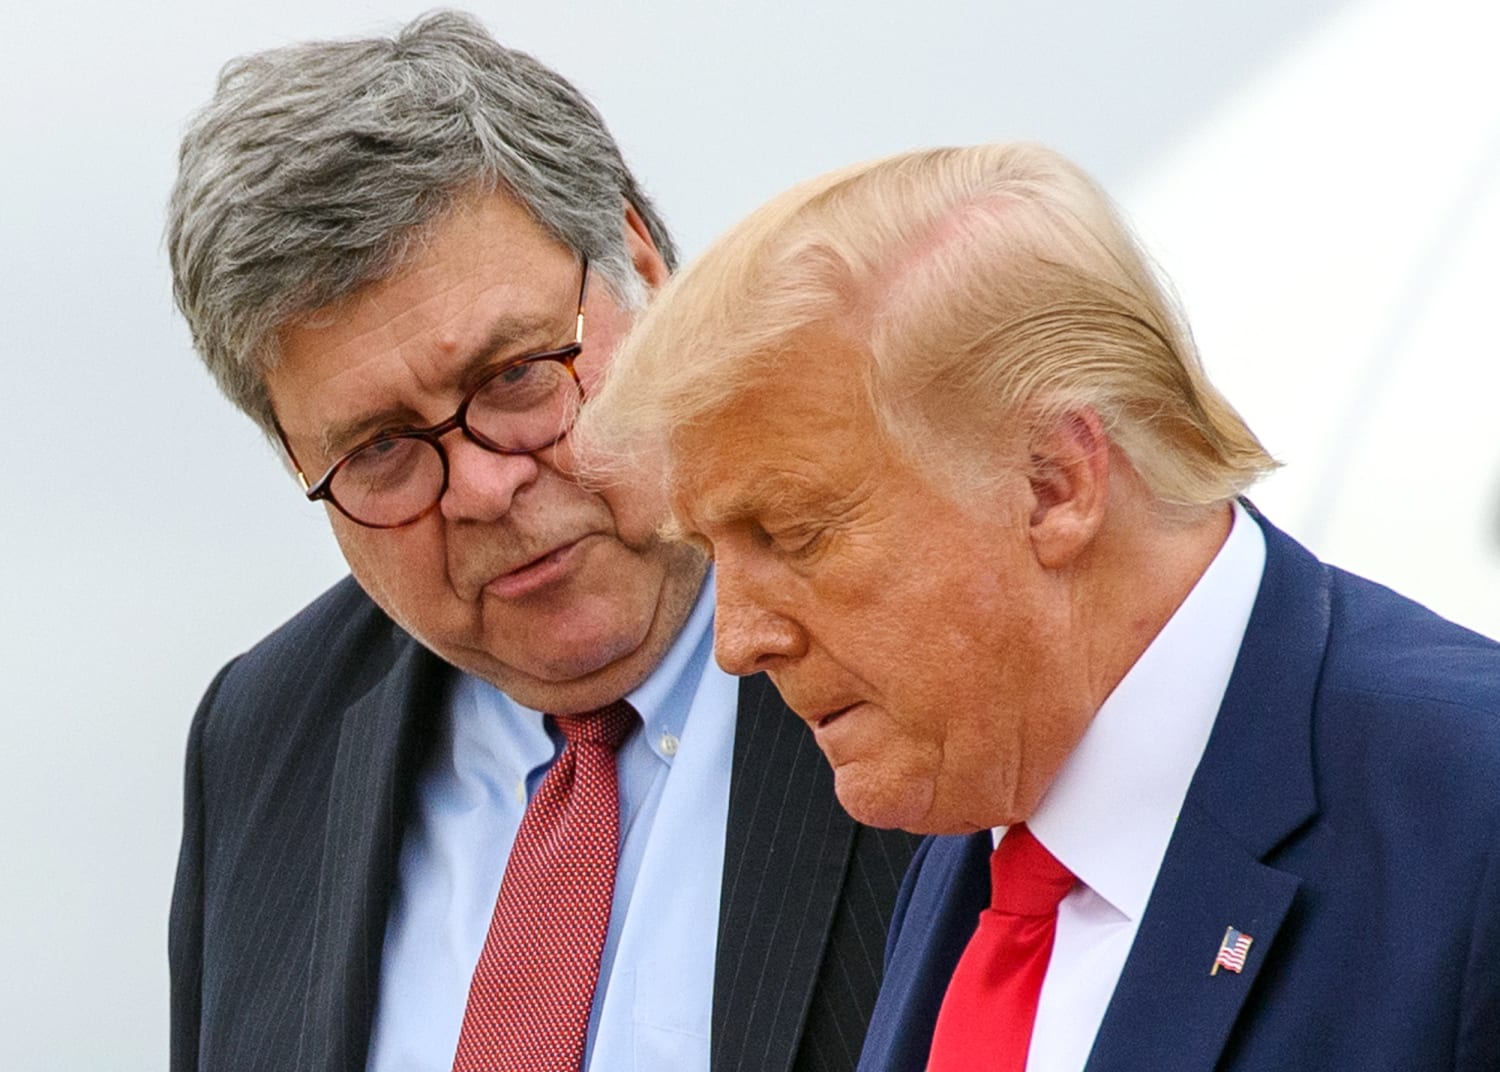 Trump hasn't ruled out firing Attorney General Barr, sources say